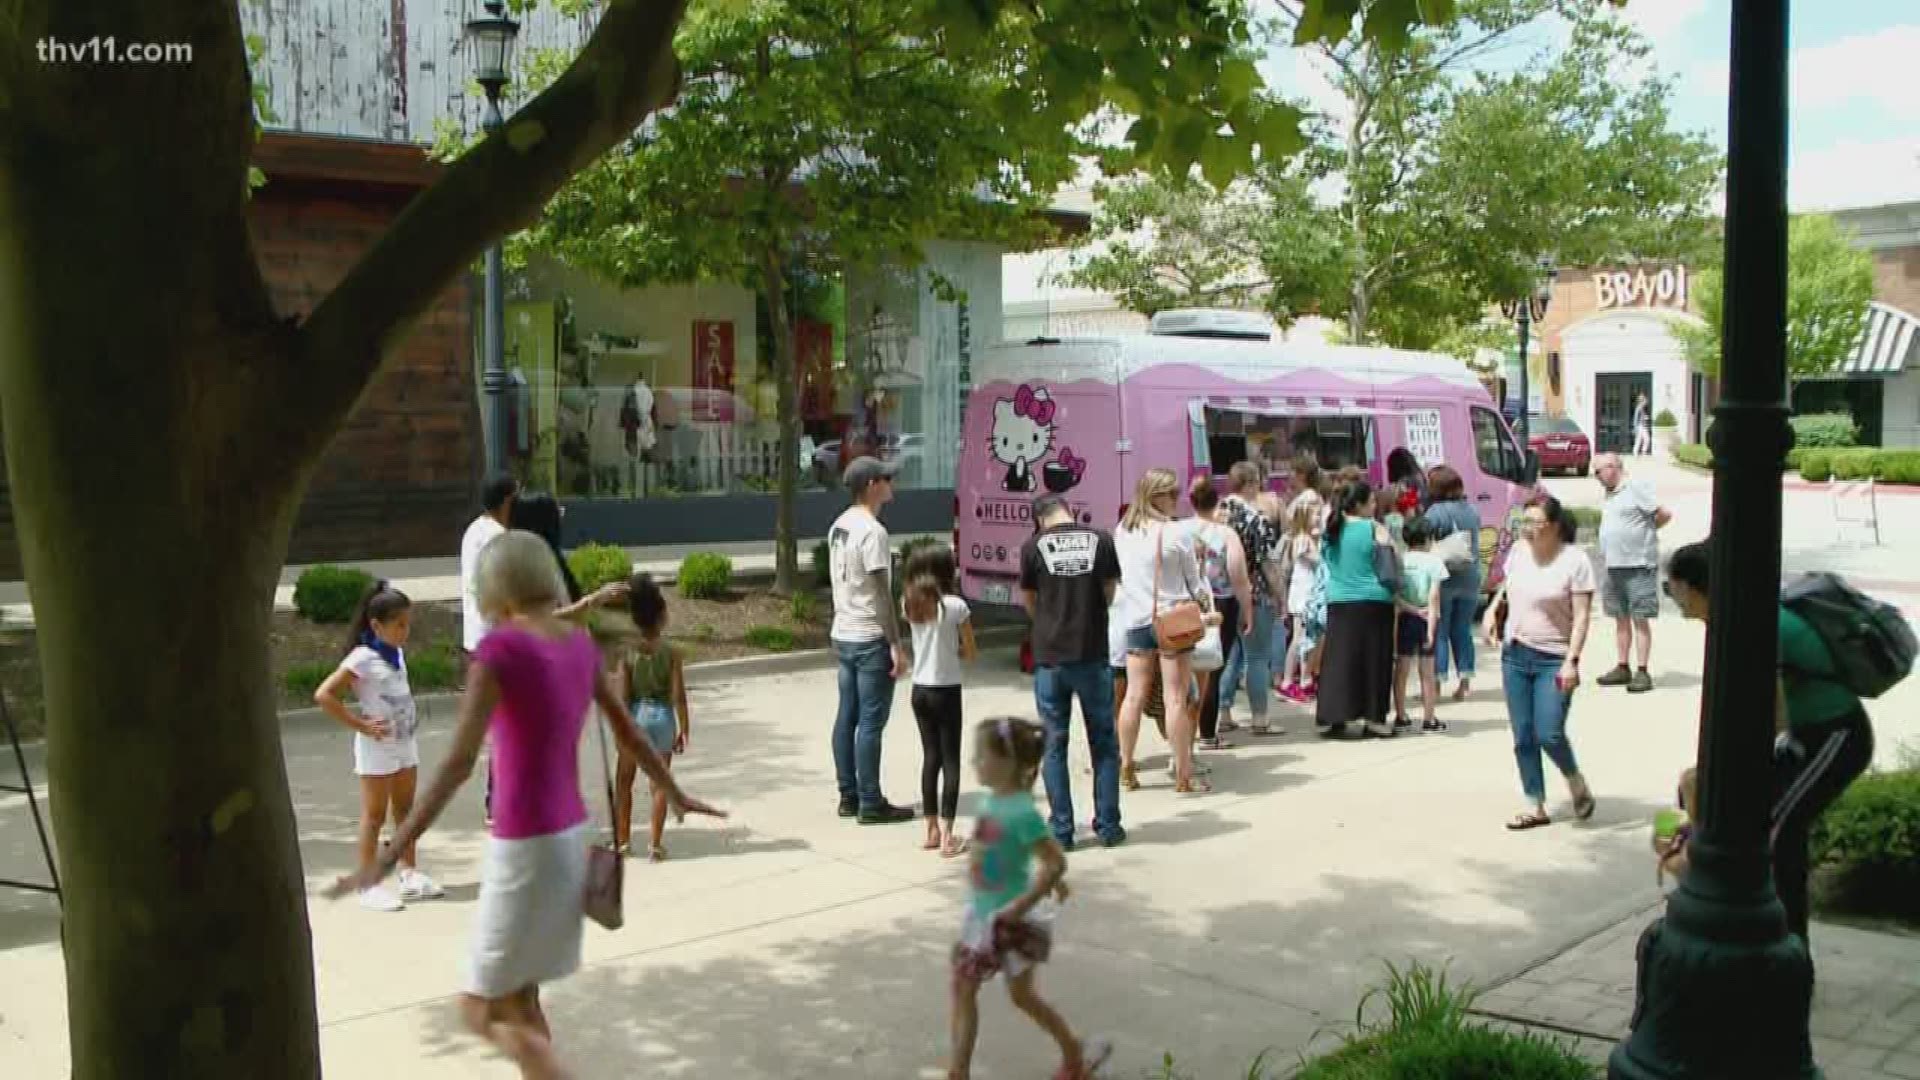 It was an exciting day for 'Hello Kitty' fans in Little Rock. The Hello Kitty Cafe truck rolled into the city for the first time.